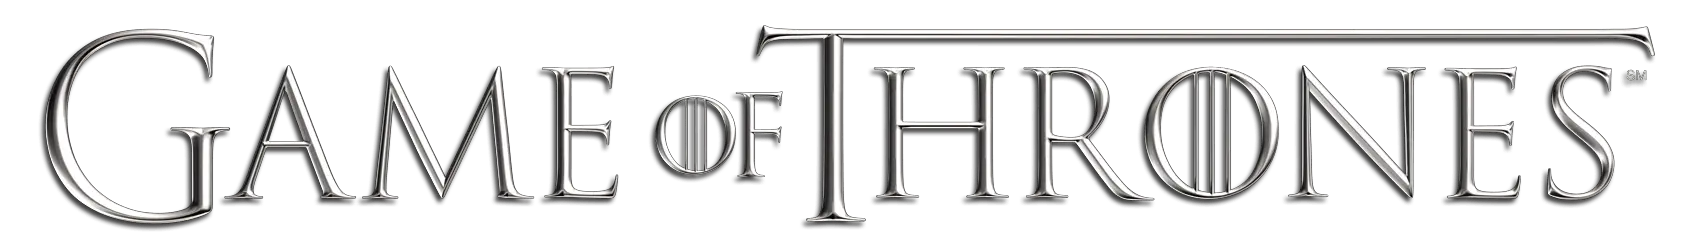 game_of_thrones-logo.png